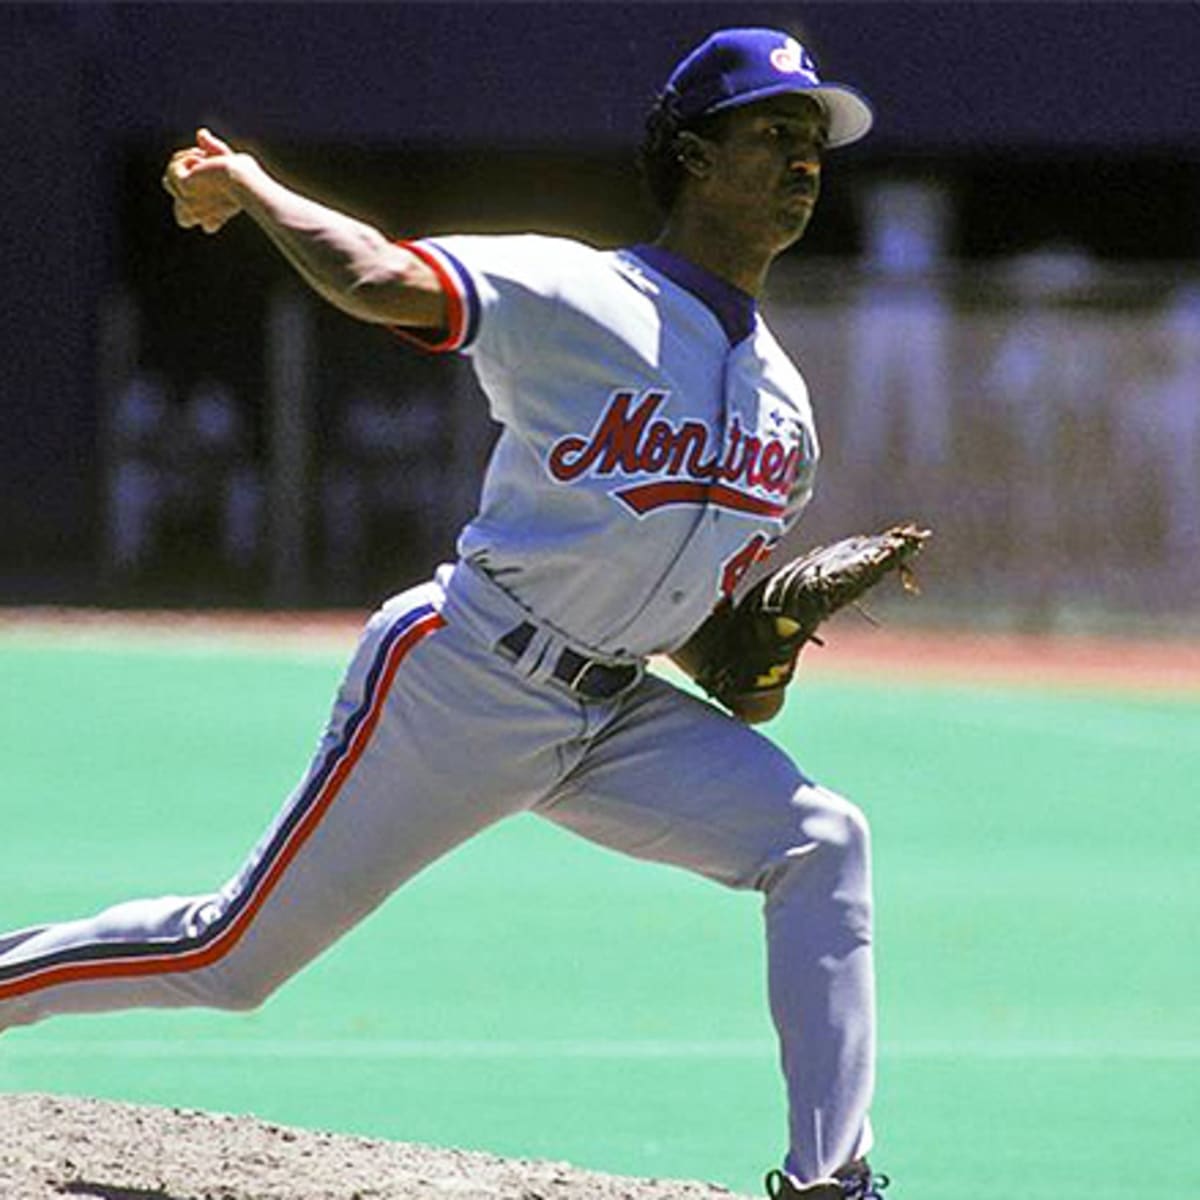 The 1994 Montreal Expos strike first in series against the Expos